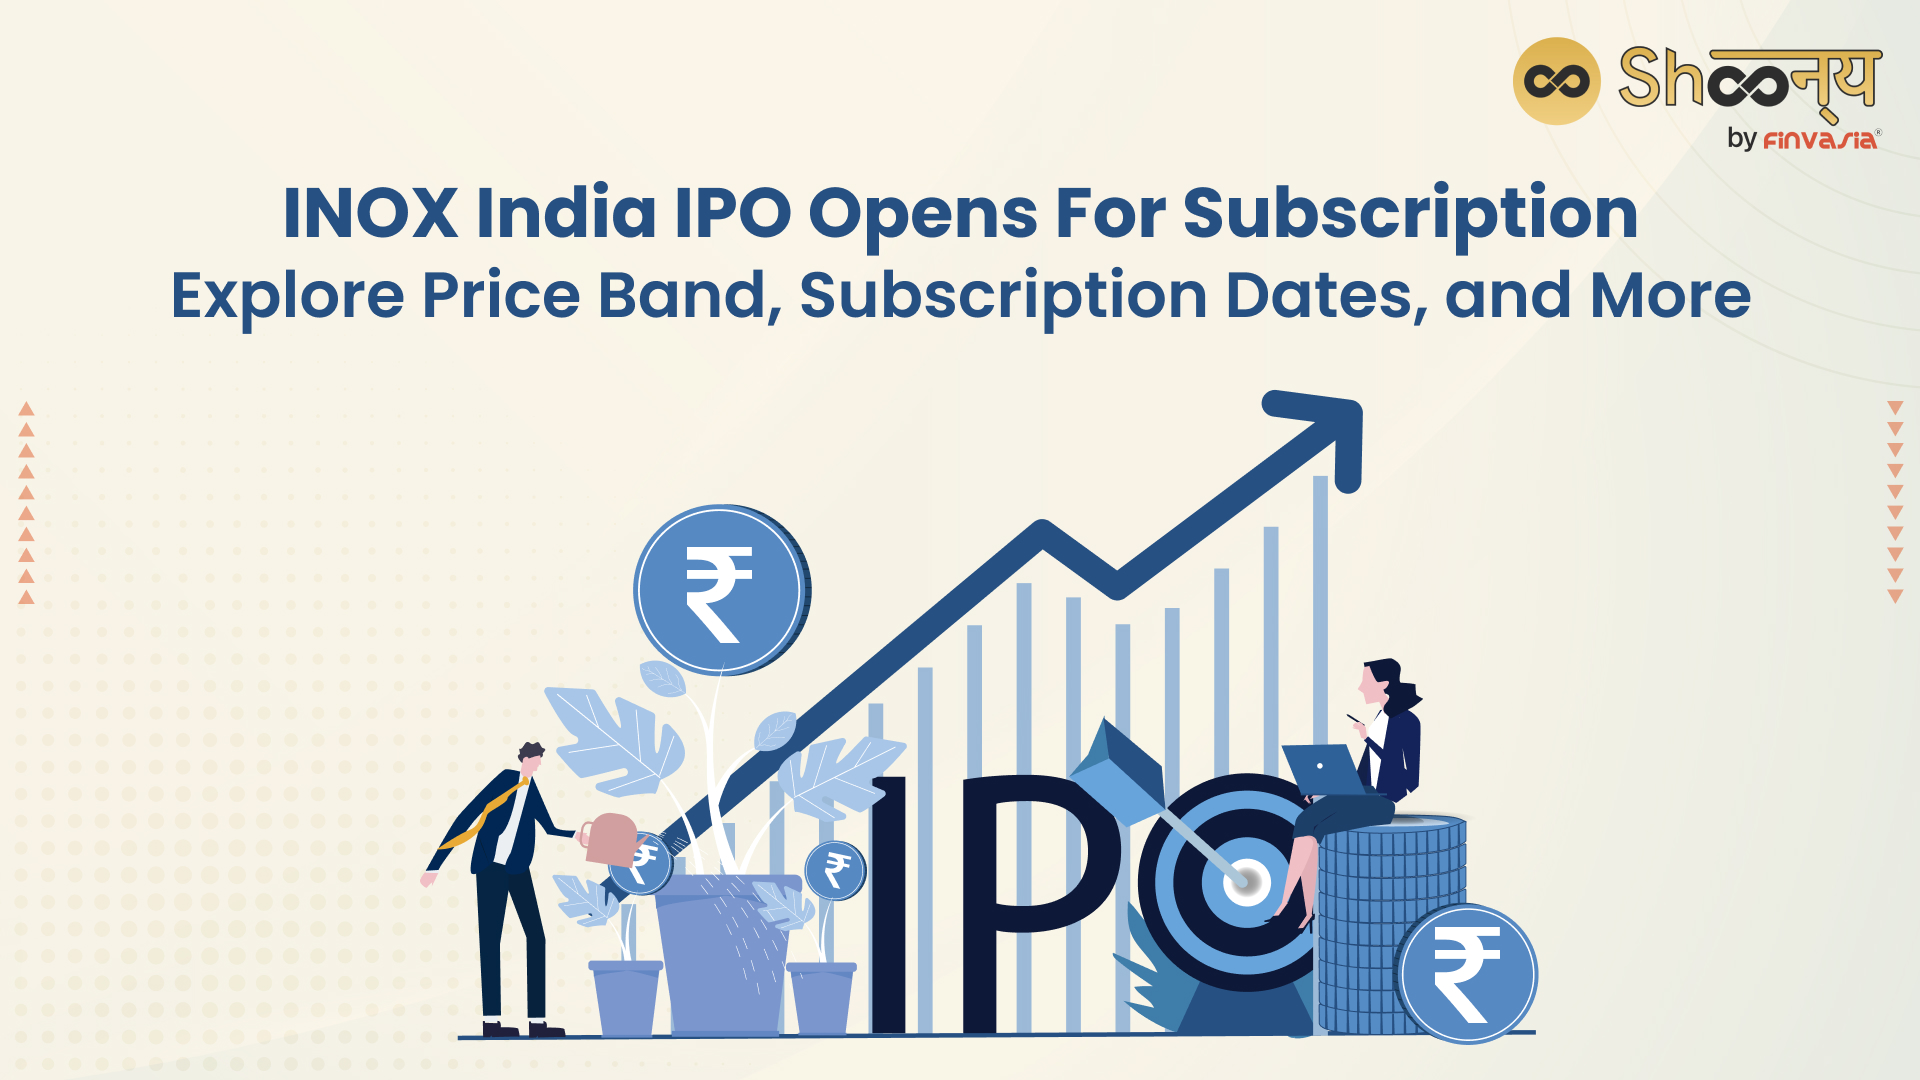 INOX India IPO Opens for Subscription on Dec 14